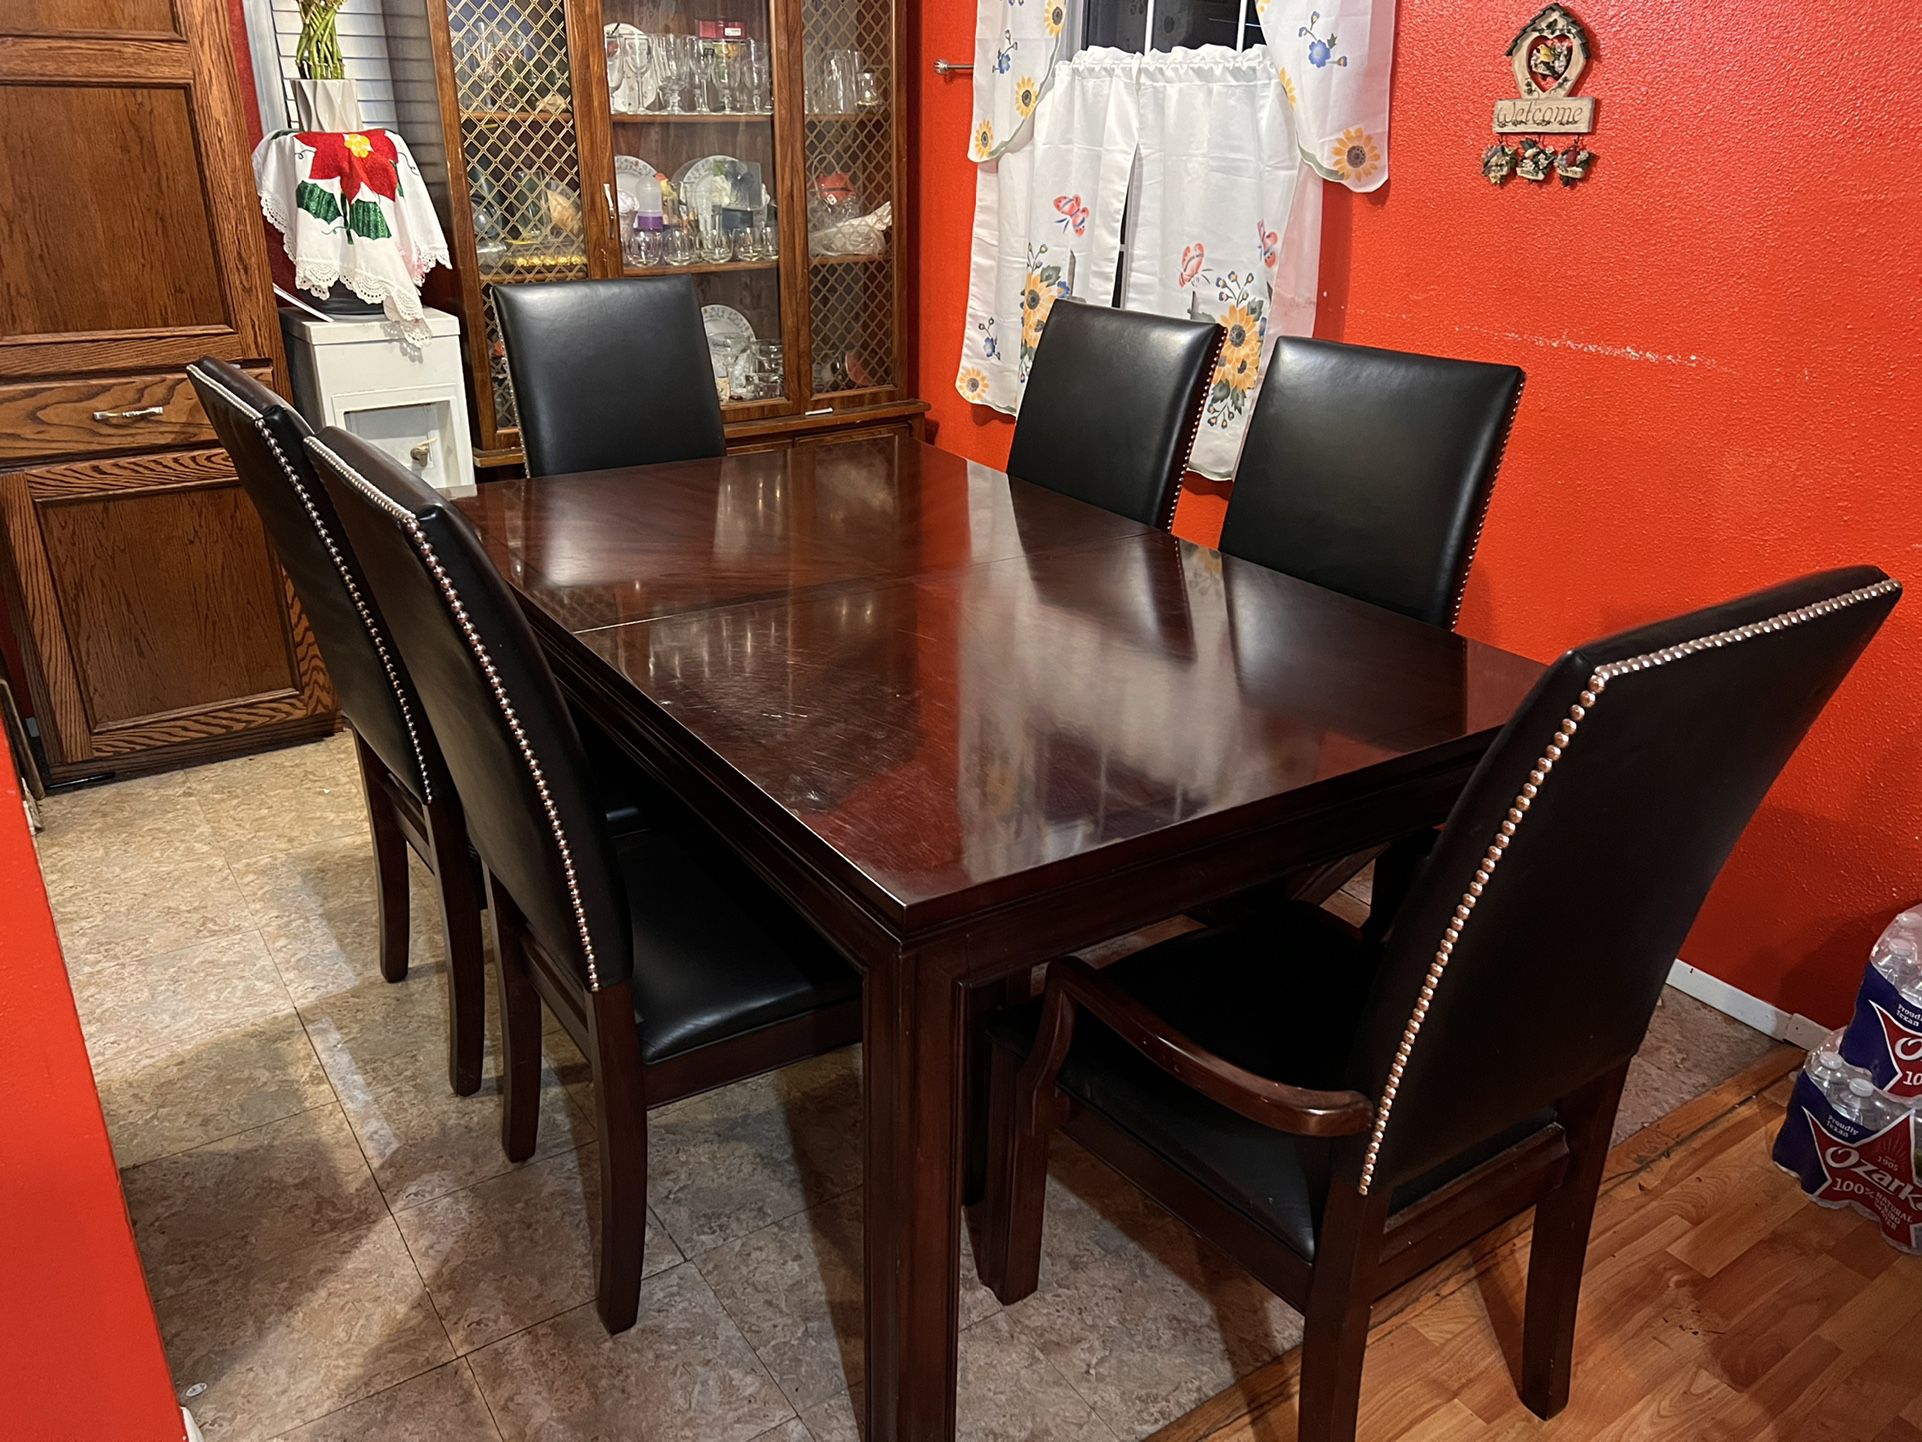 Coffee-colored dining room